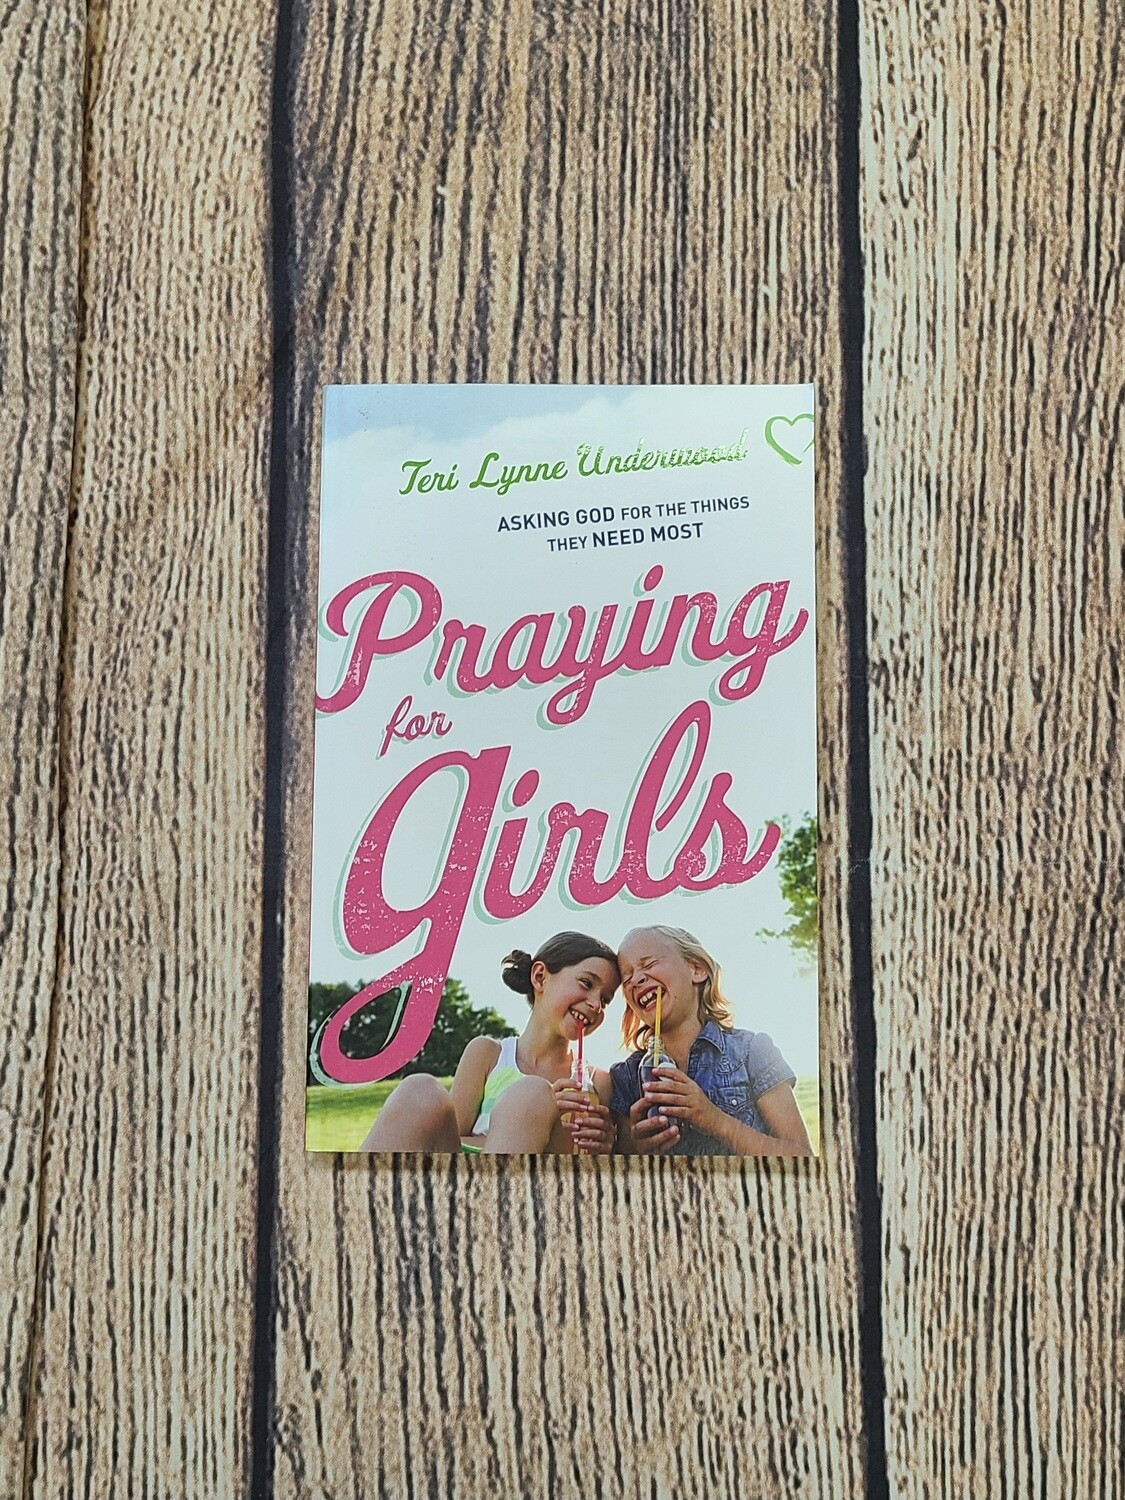 Praying for Girls: Asking God for the Things They Need Most by Teri Lynne Underwood